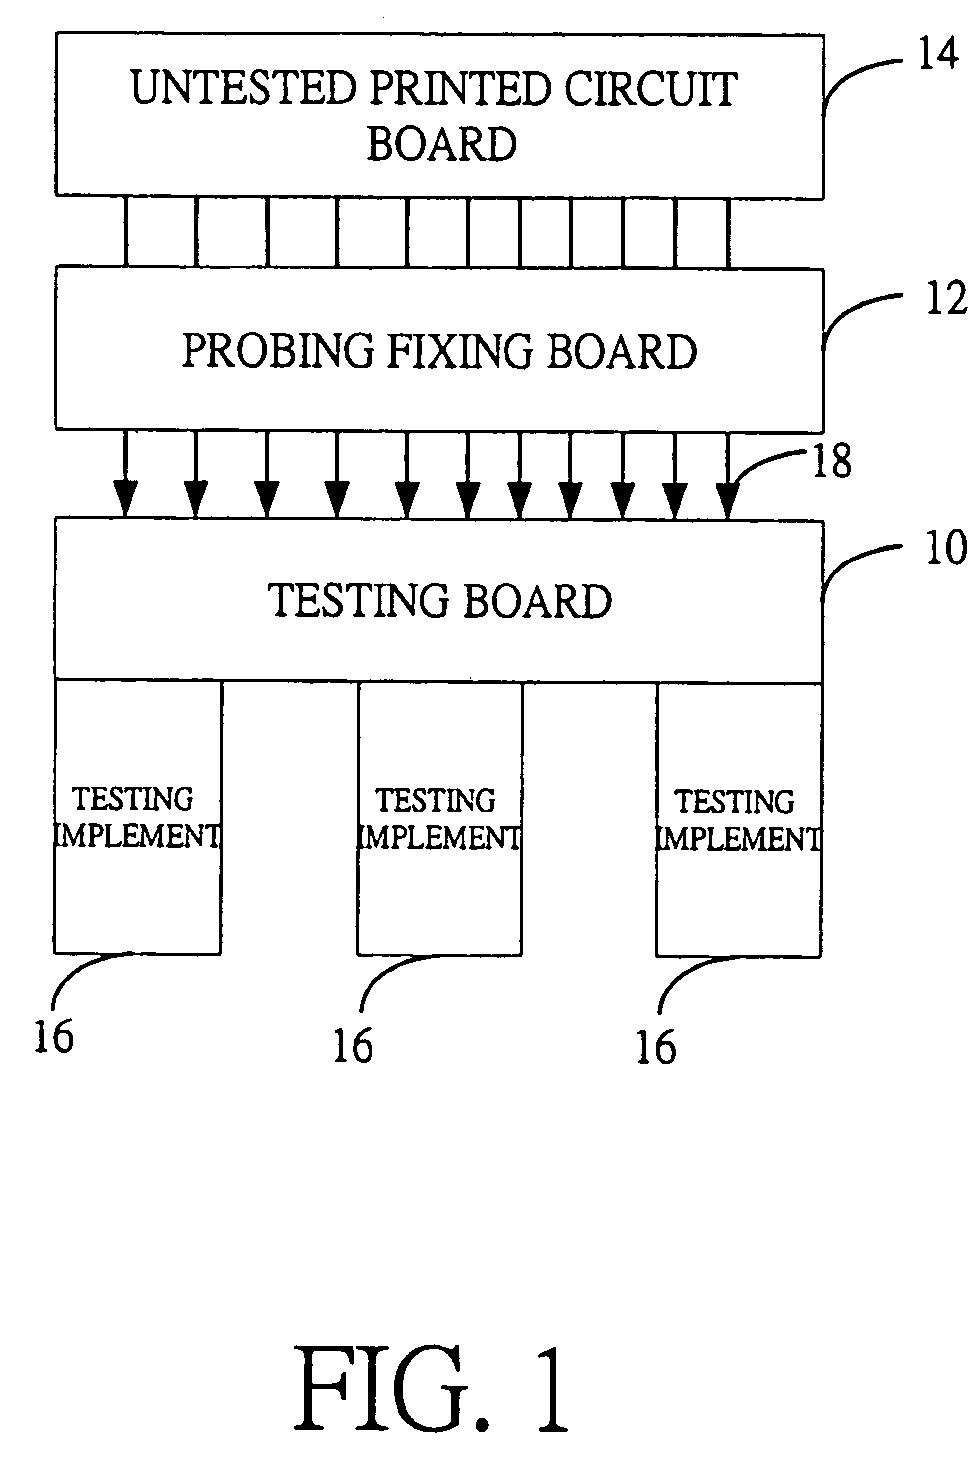 Testing device for printed circuit boards